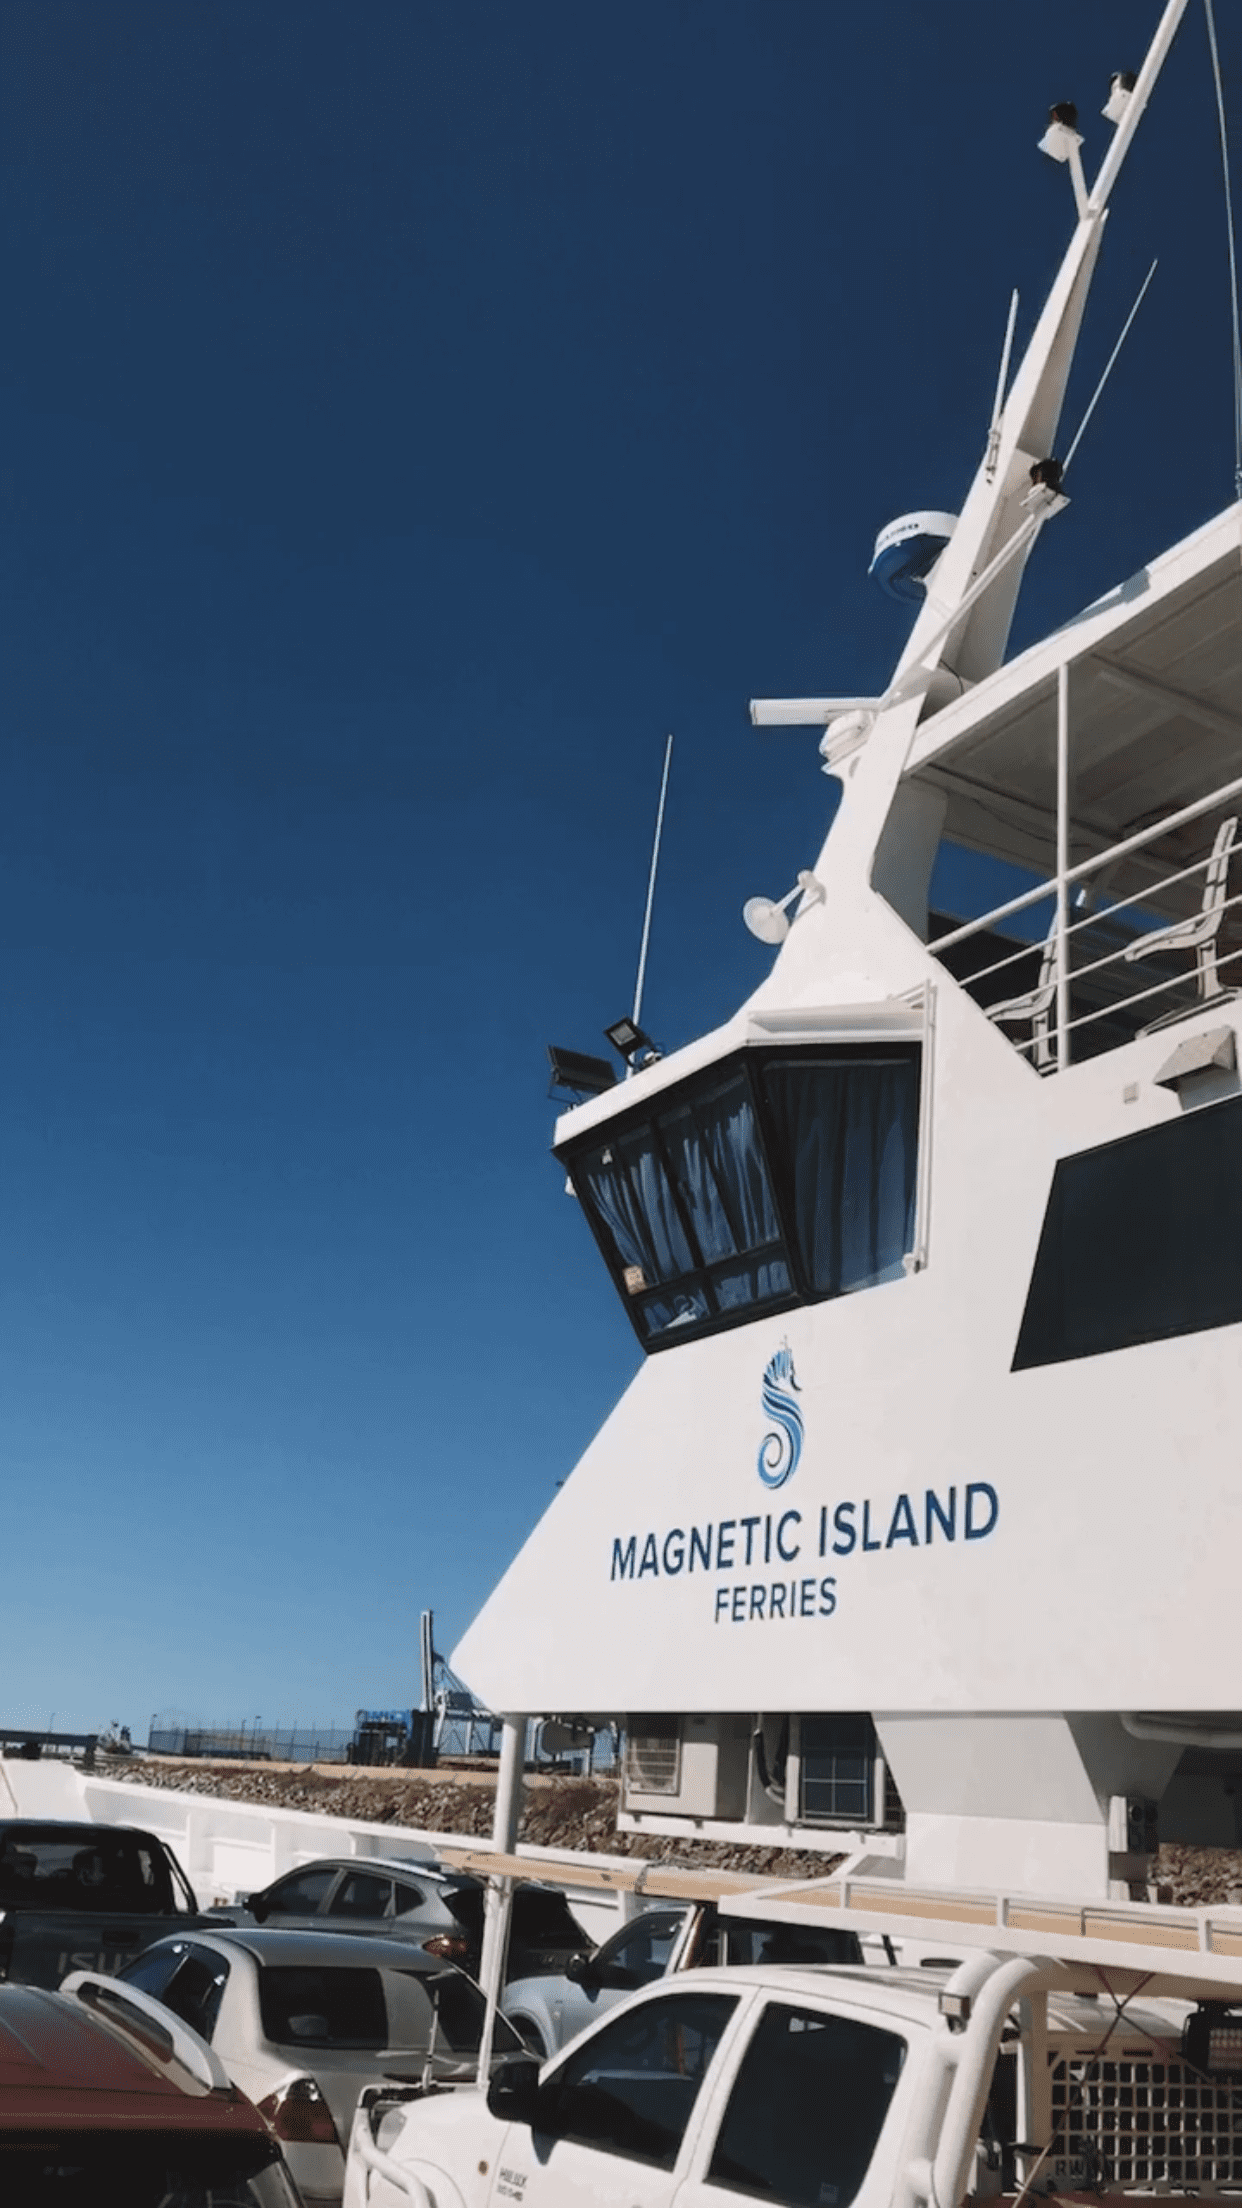 Travelling to Magnetic Island on the car ferry